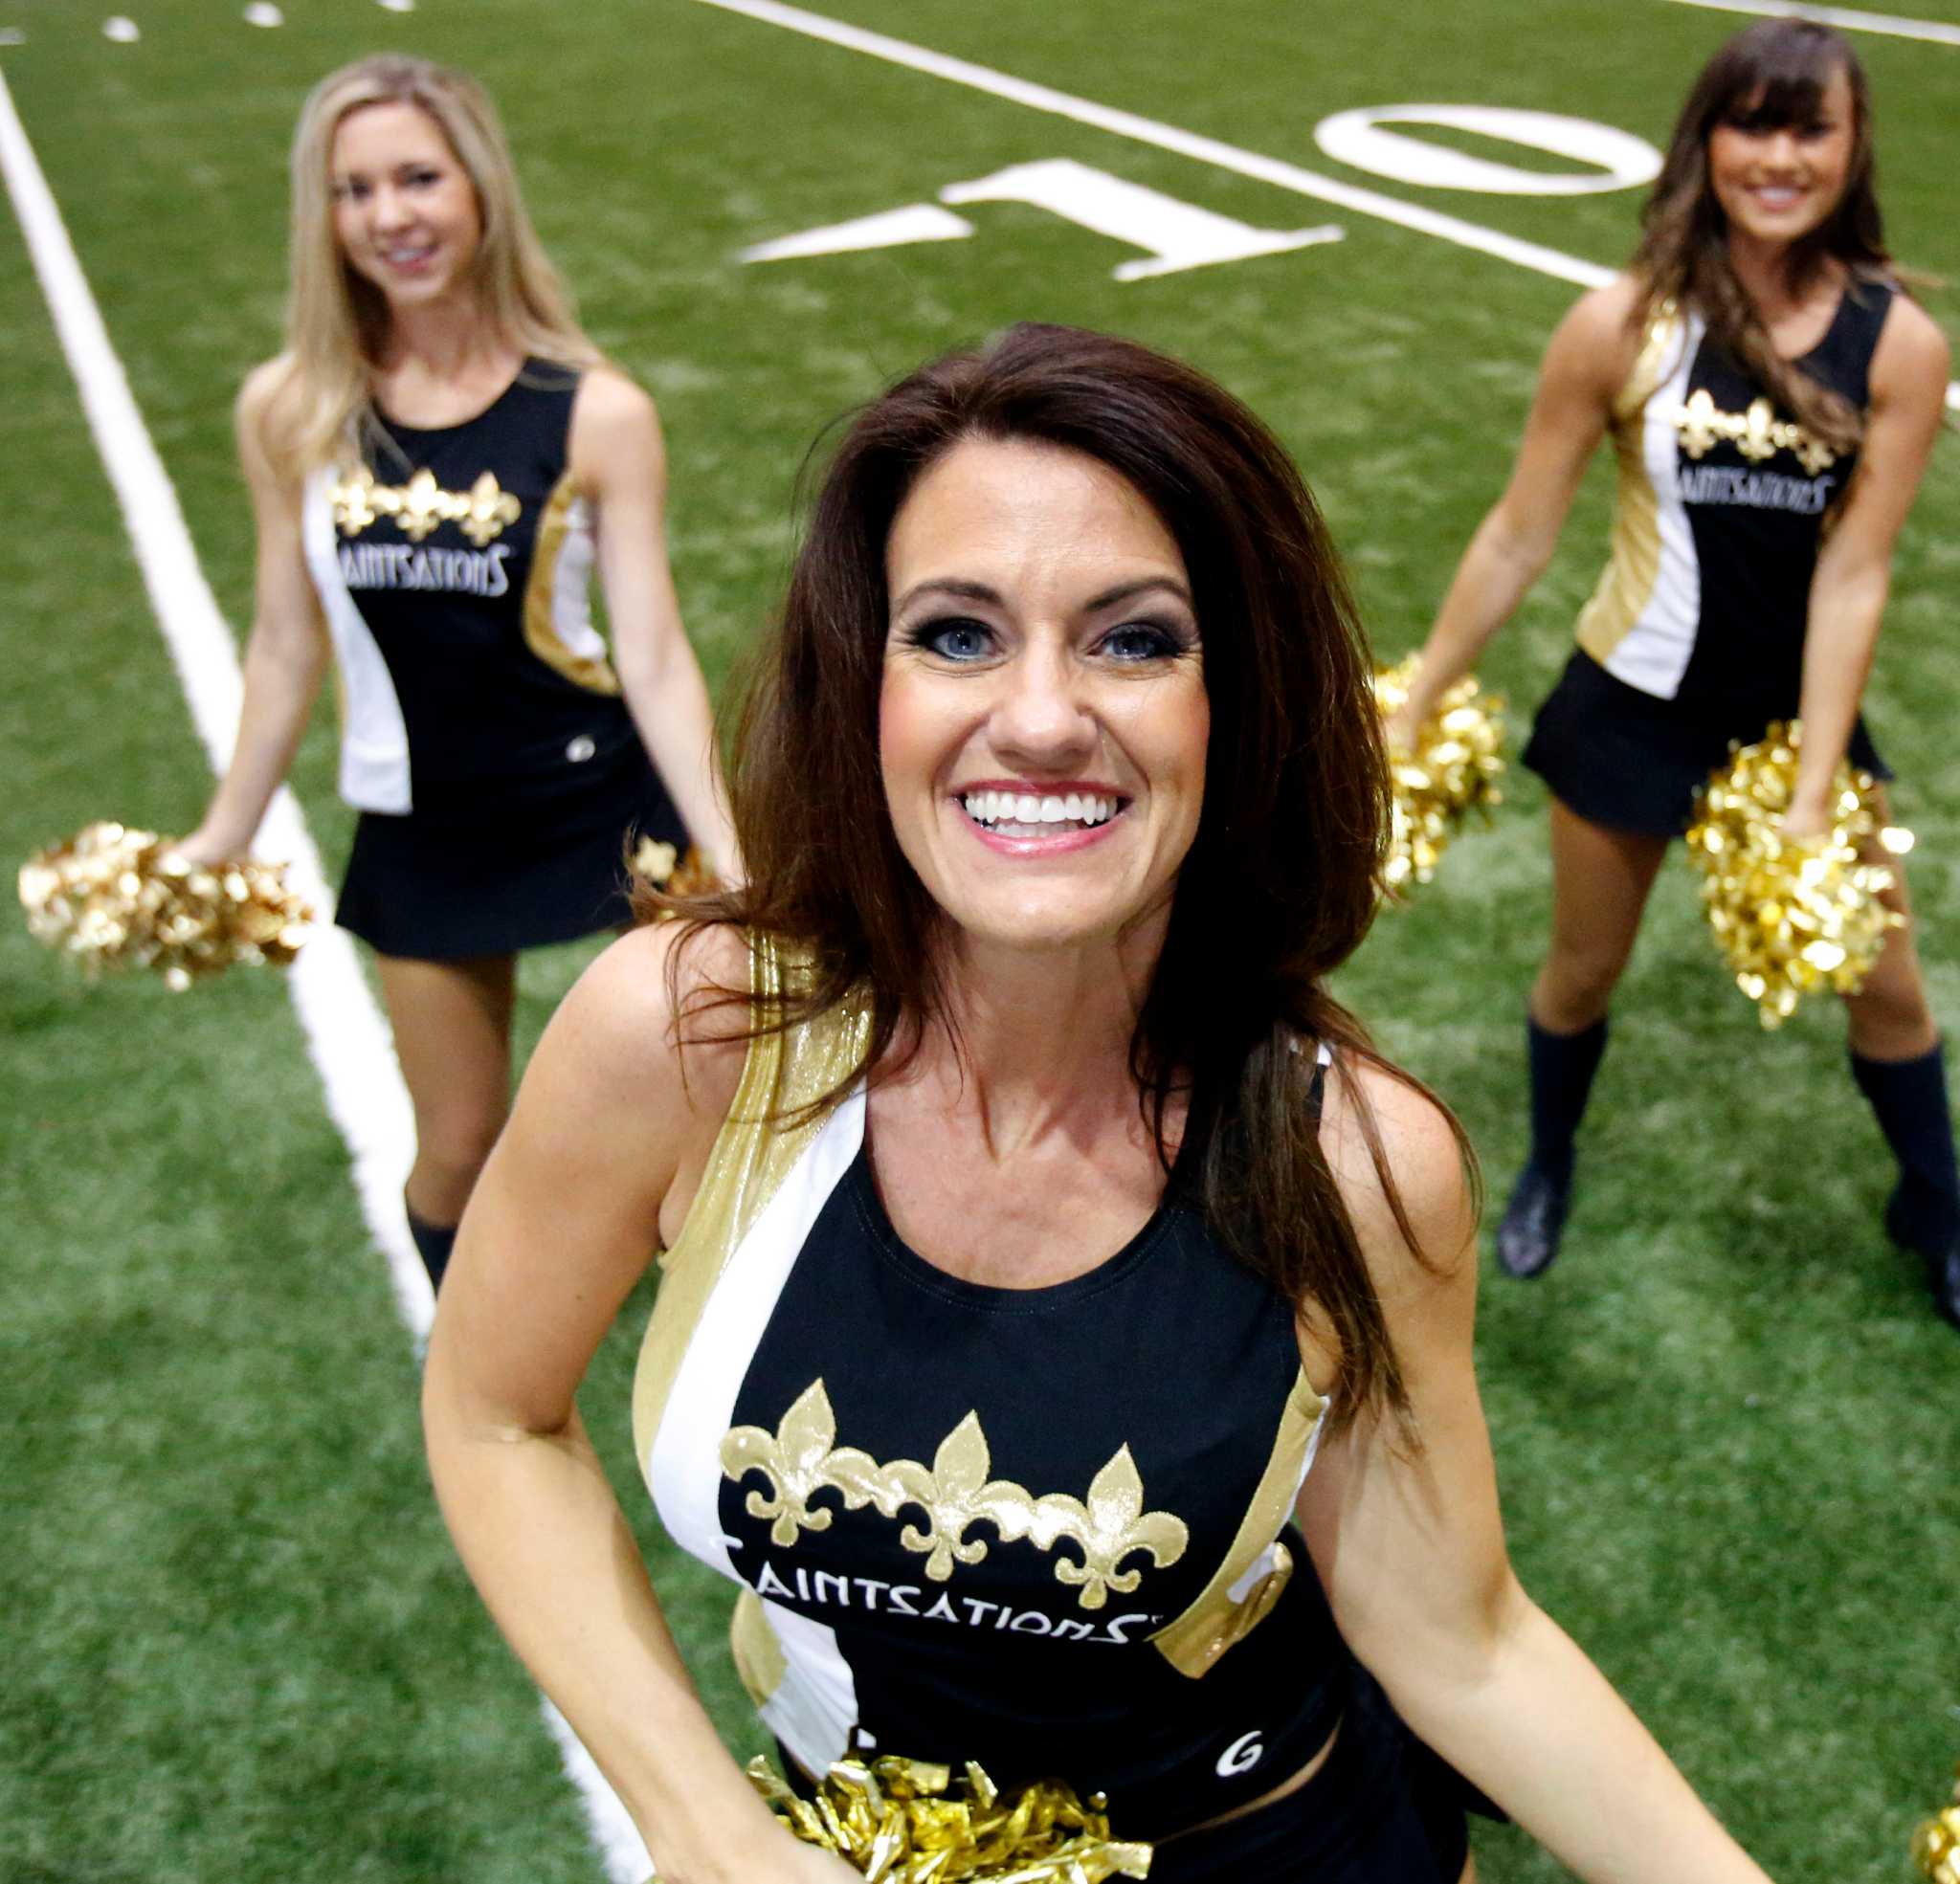 40-year-old mom makes NFL cheerleading squad.